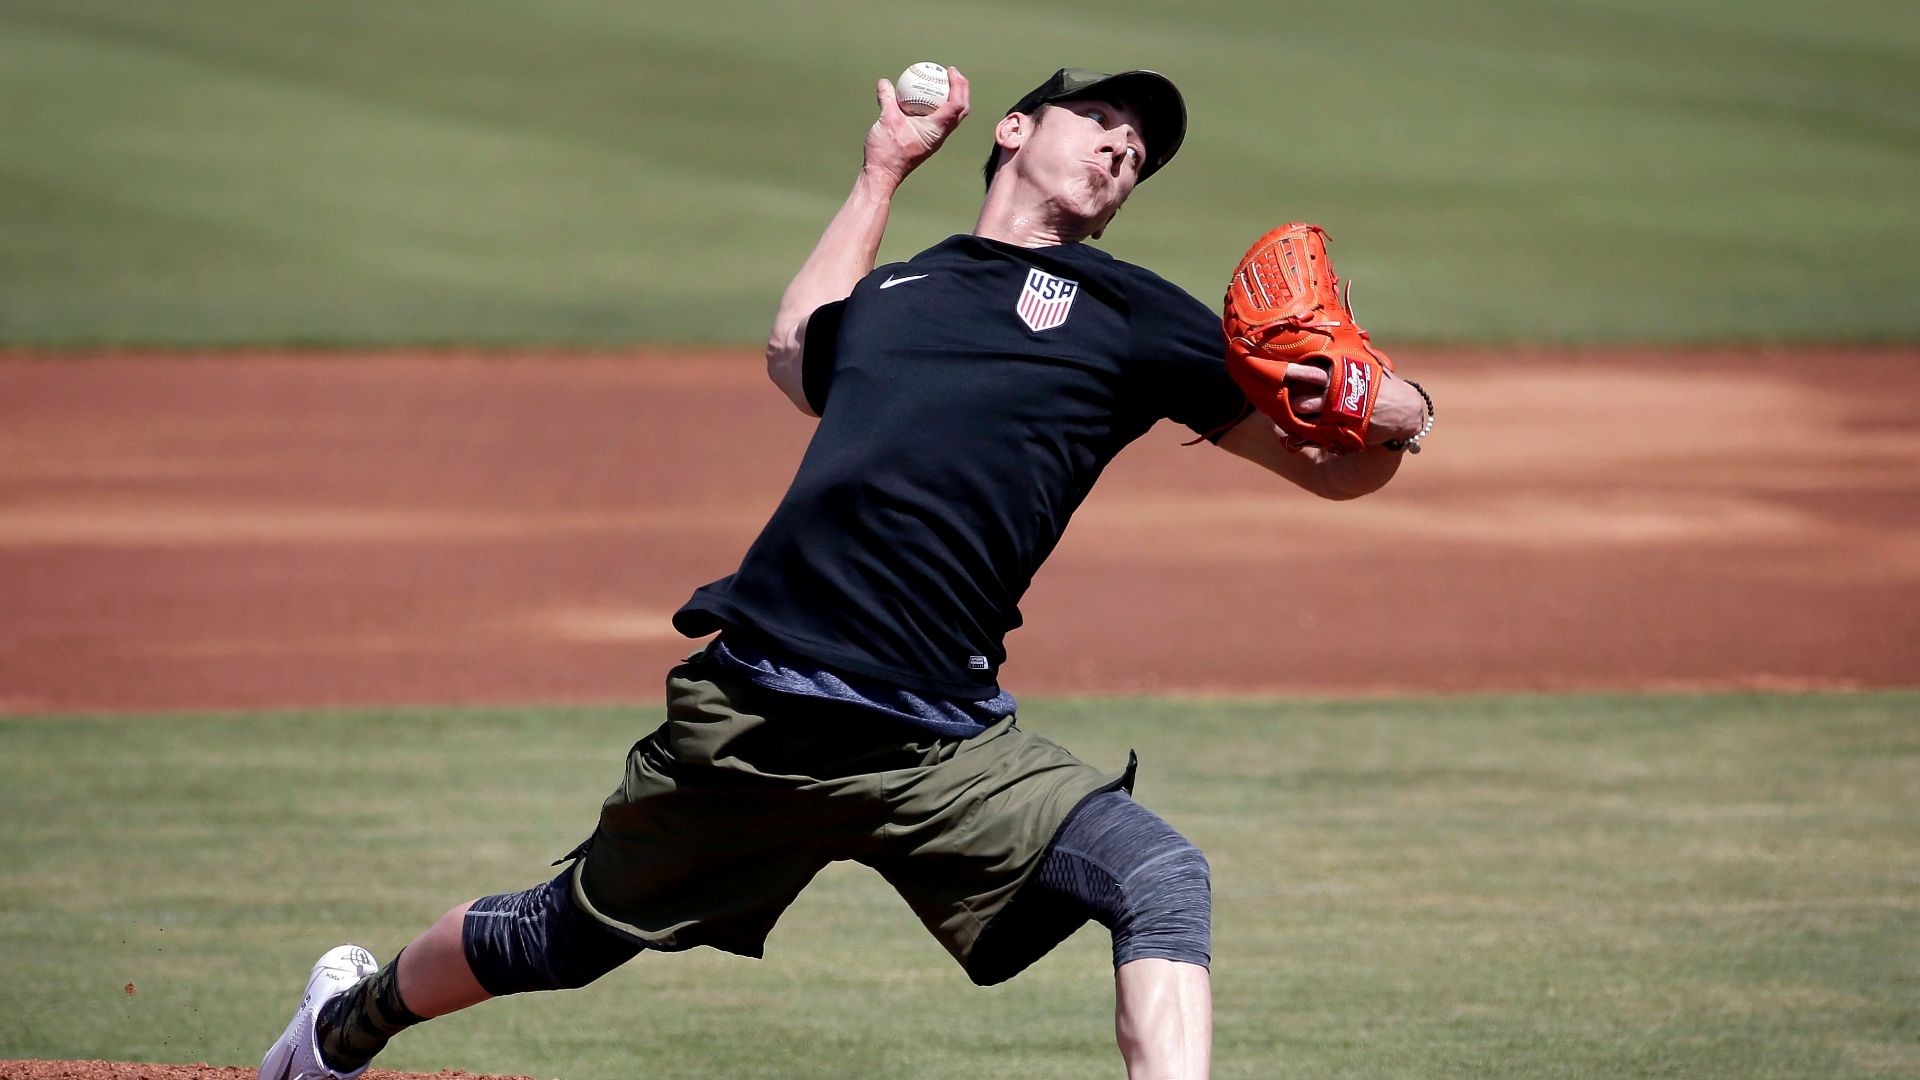 Can Lincecum's stuff translate to the American League?